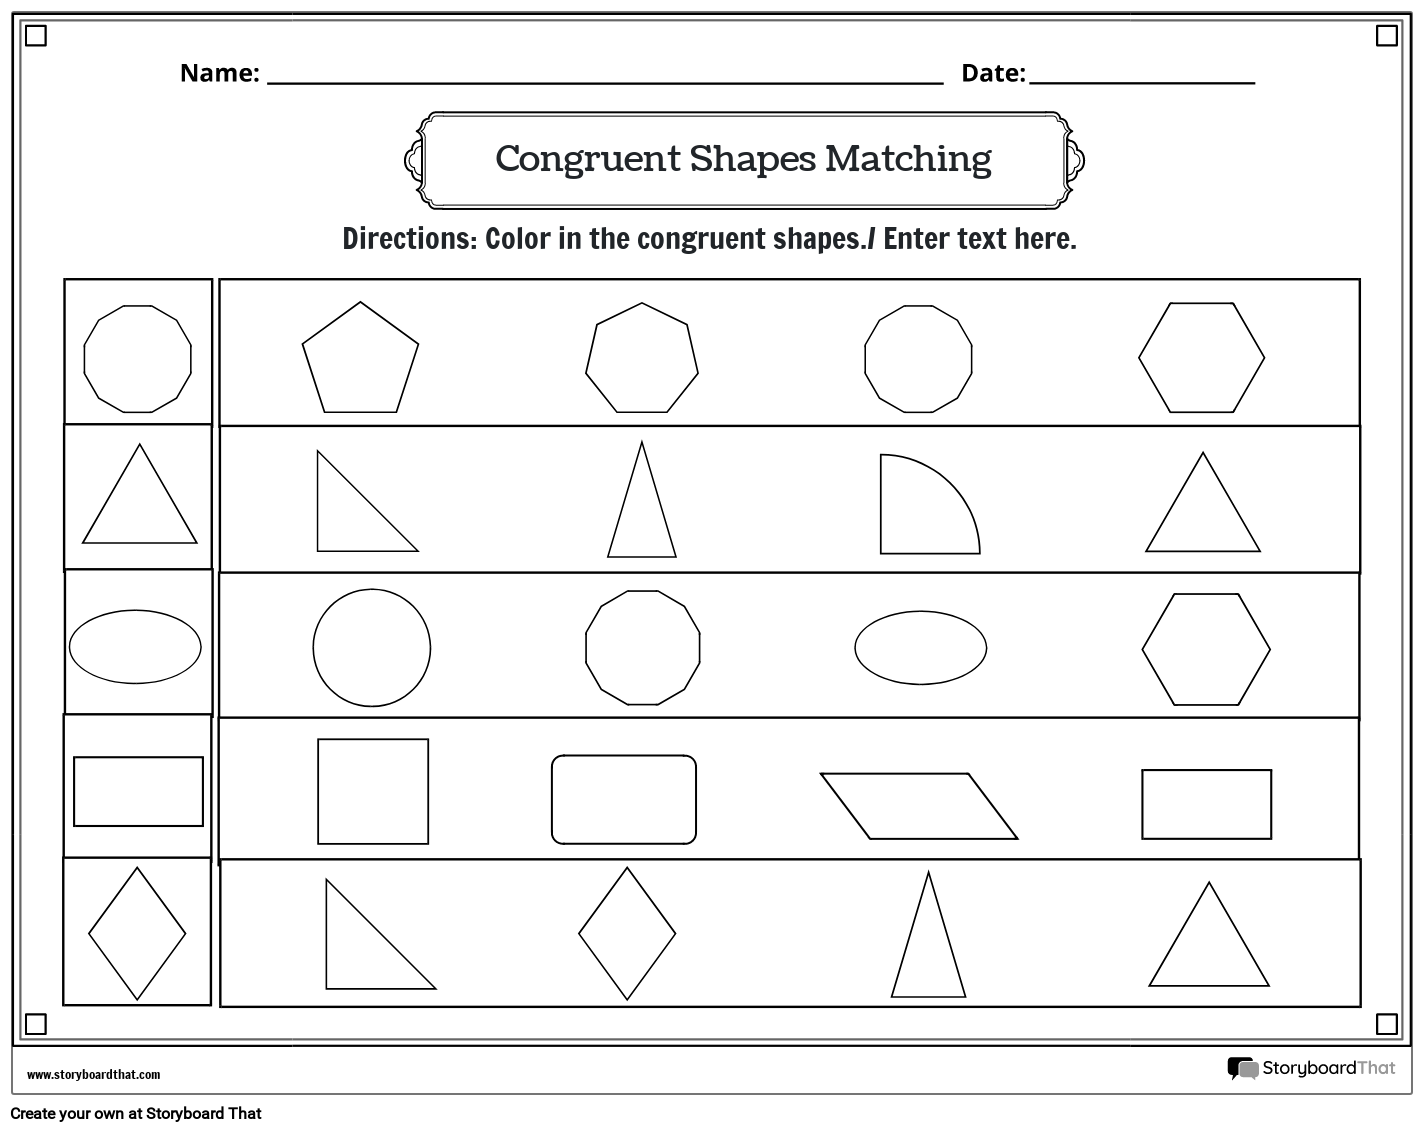 Congruent Shapes Worksheet with Coloring (black and white)